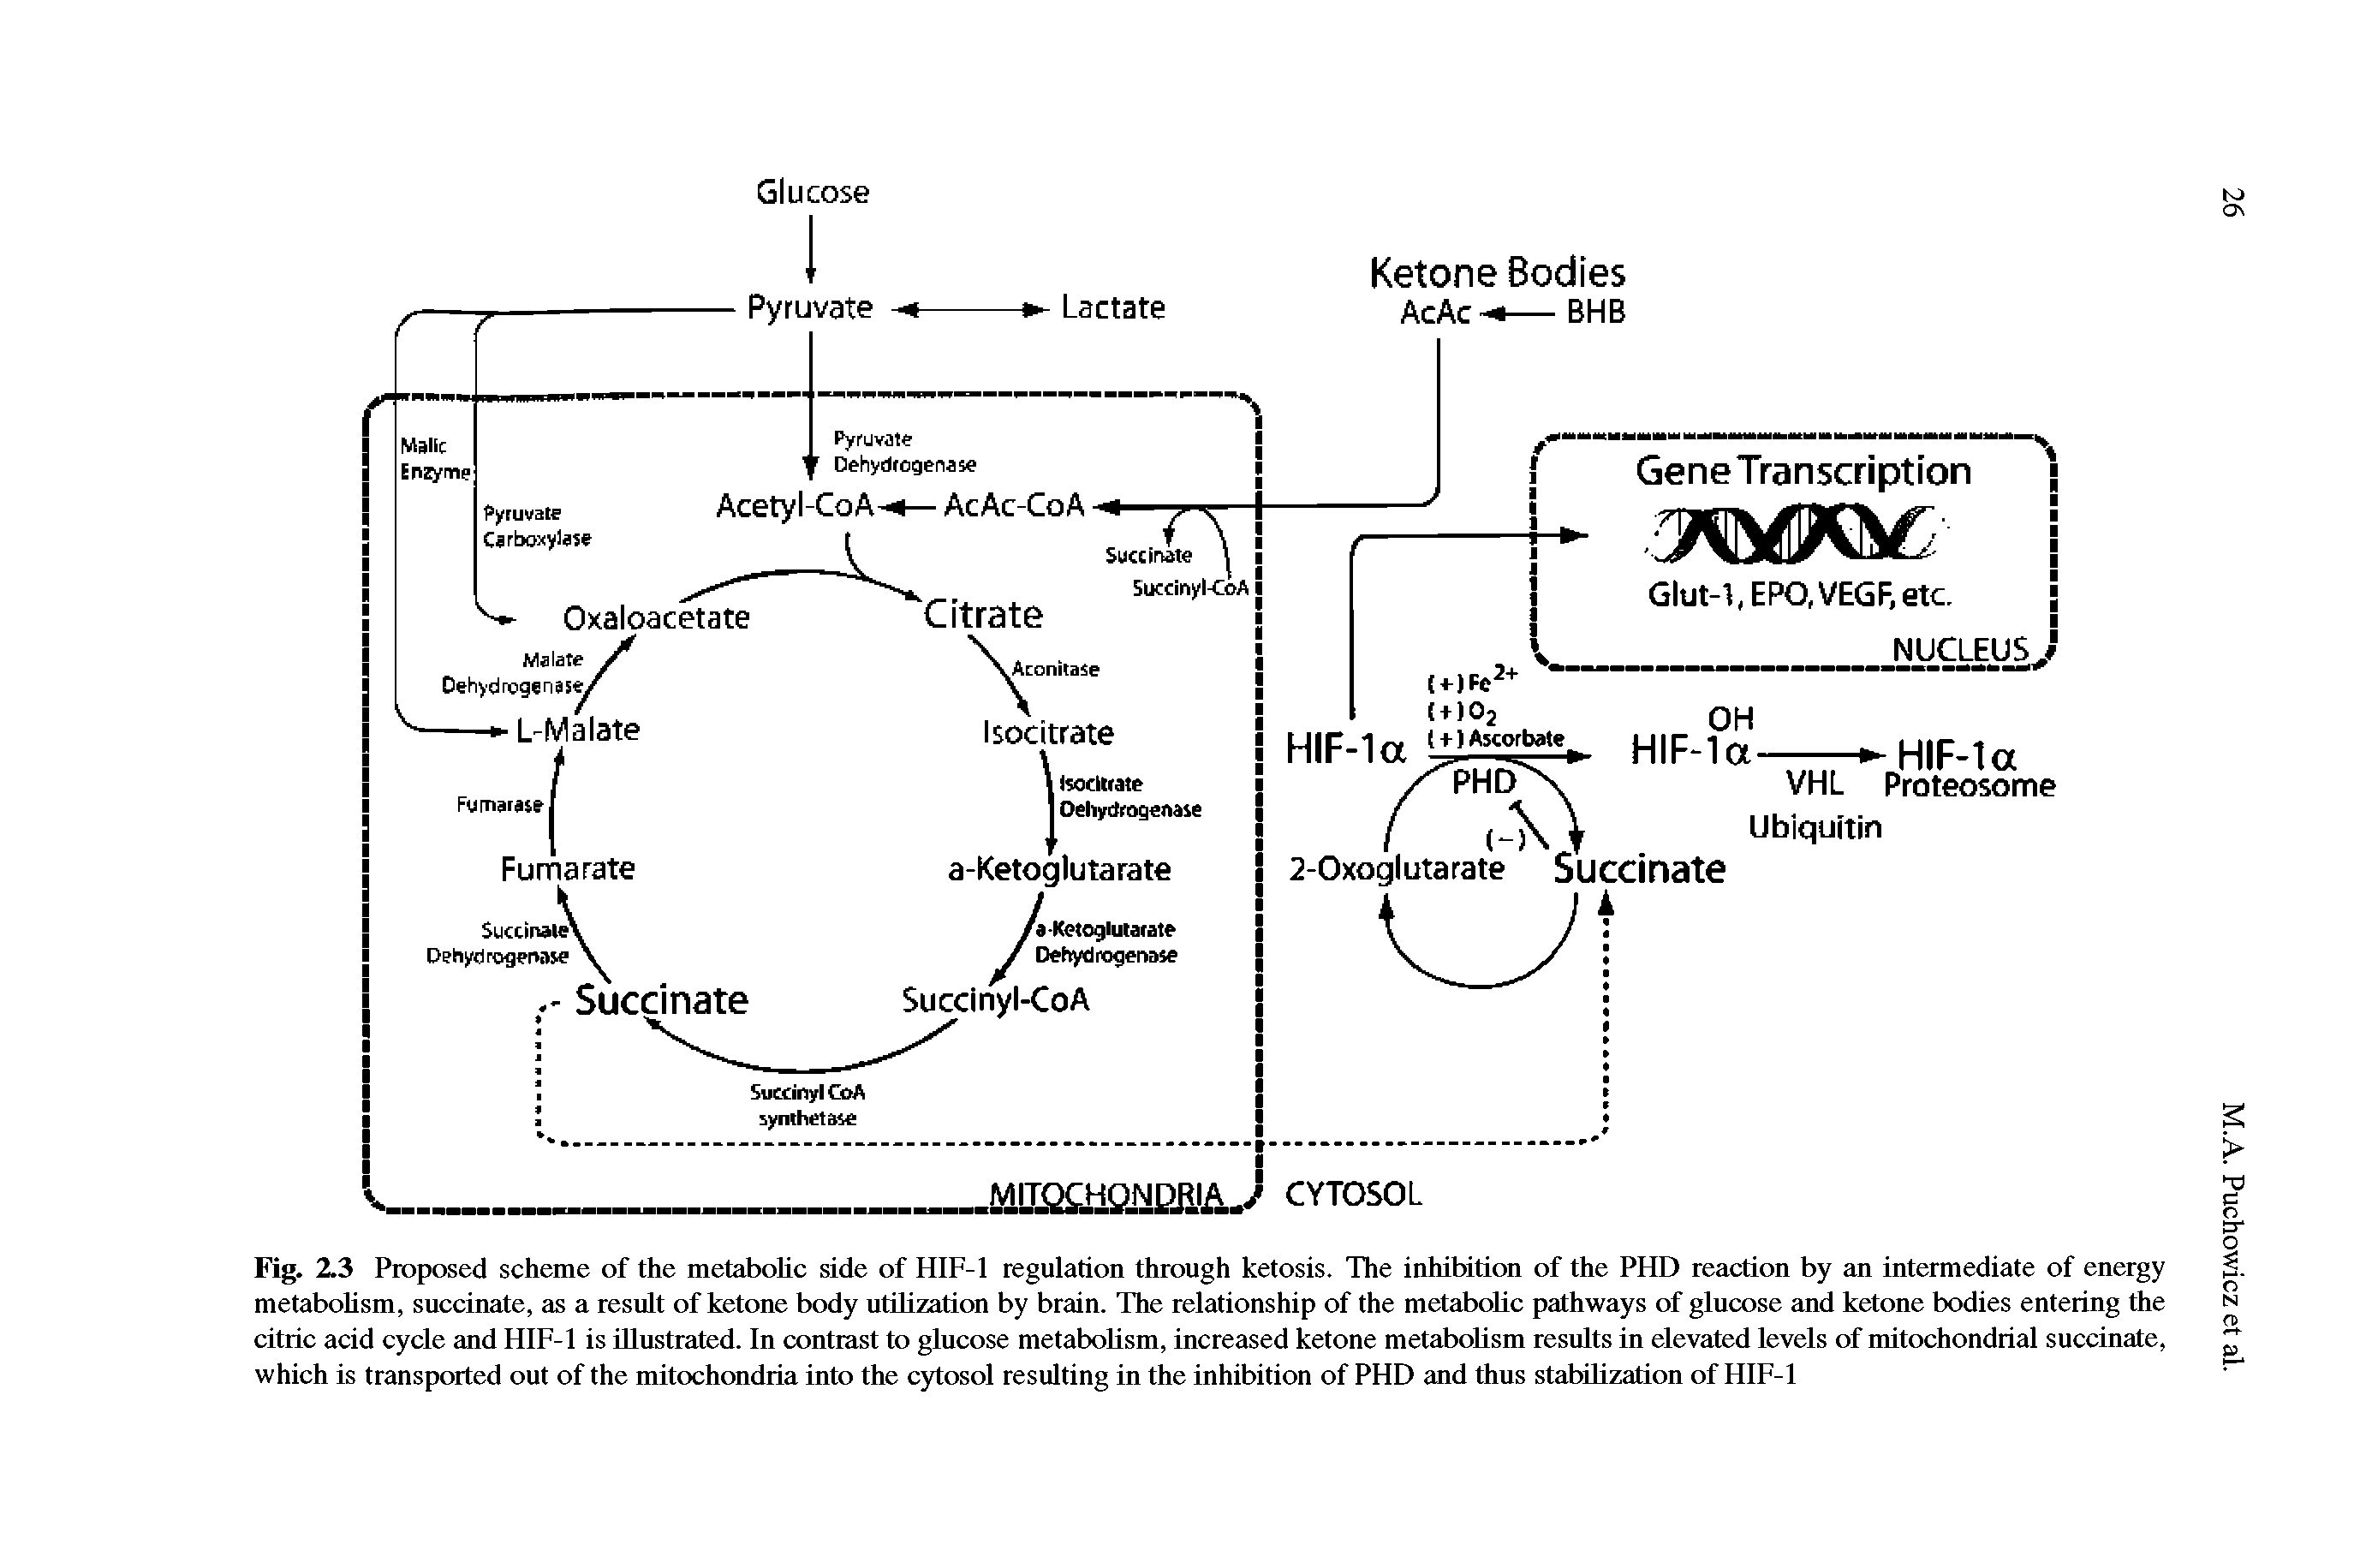 Fig. 2.3 Proposed scheme of the metabohc side of HIF-1 regulation through ketosis. The inhibition of the PHD reaction by an intermediate of energy metabolism, succinate, as a result of ketone body utilization by brain. The relationship of the metabolic pathways of glucose and ketone bodies entering the citric acid cycle and HlF-1 is illustrated. In contrast to glucose metabolism, increased ketone metabolism results in elevated levels of mitochondrial succinate, which is transported out of the mitochondria into the cytosol resulting in the inhibition of PHD and thus stabilization of HIF-1...